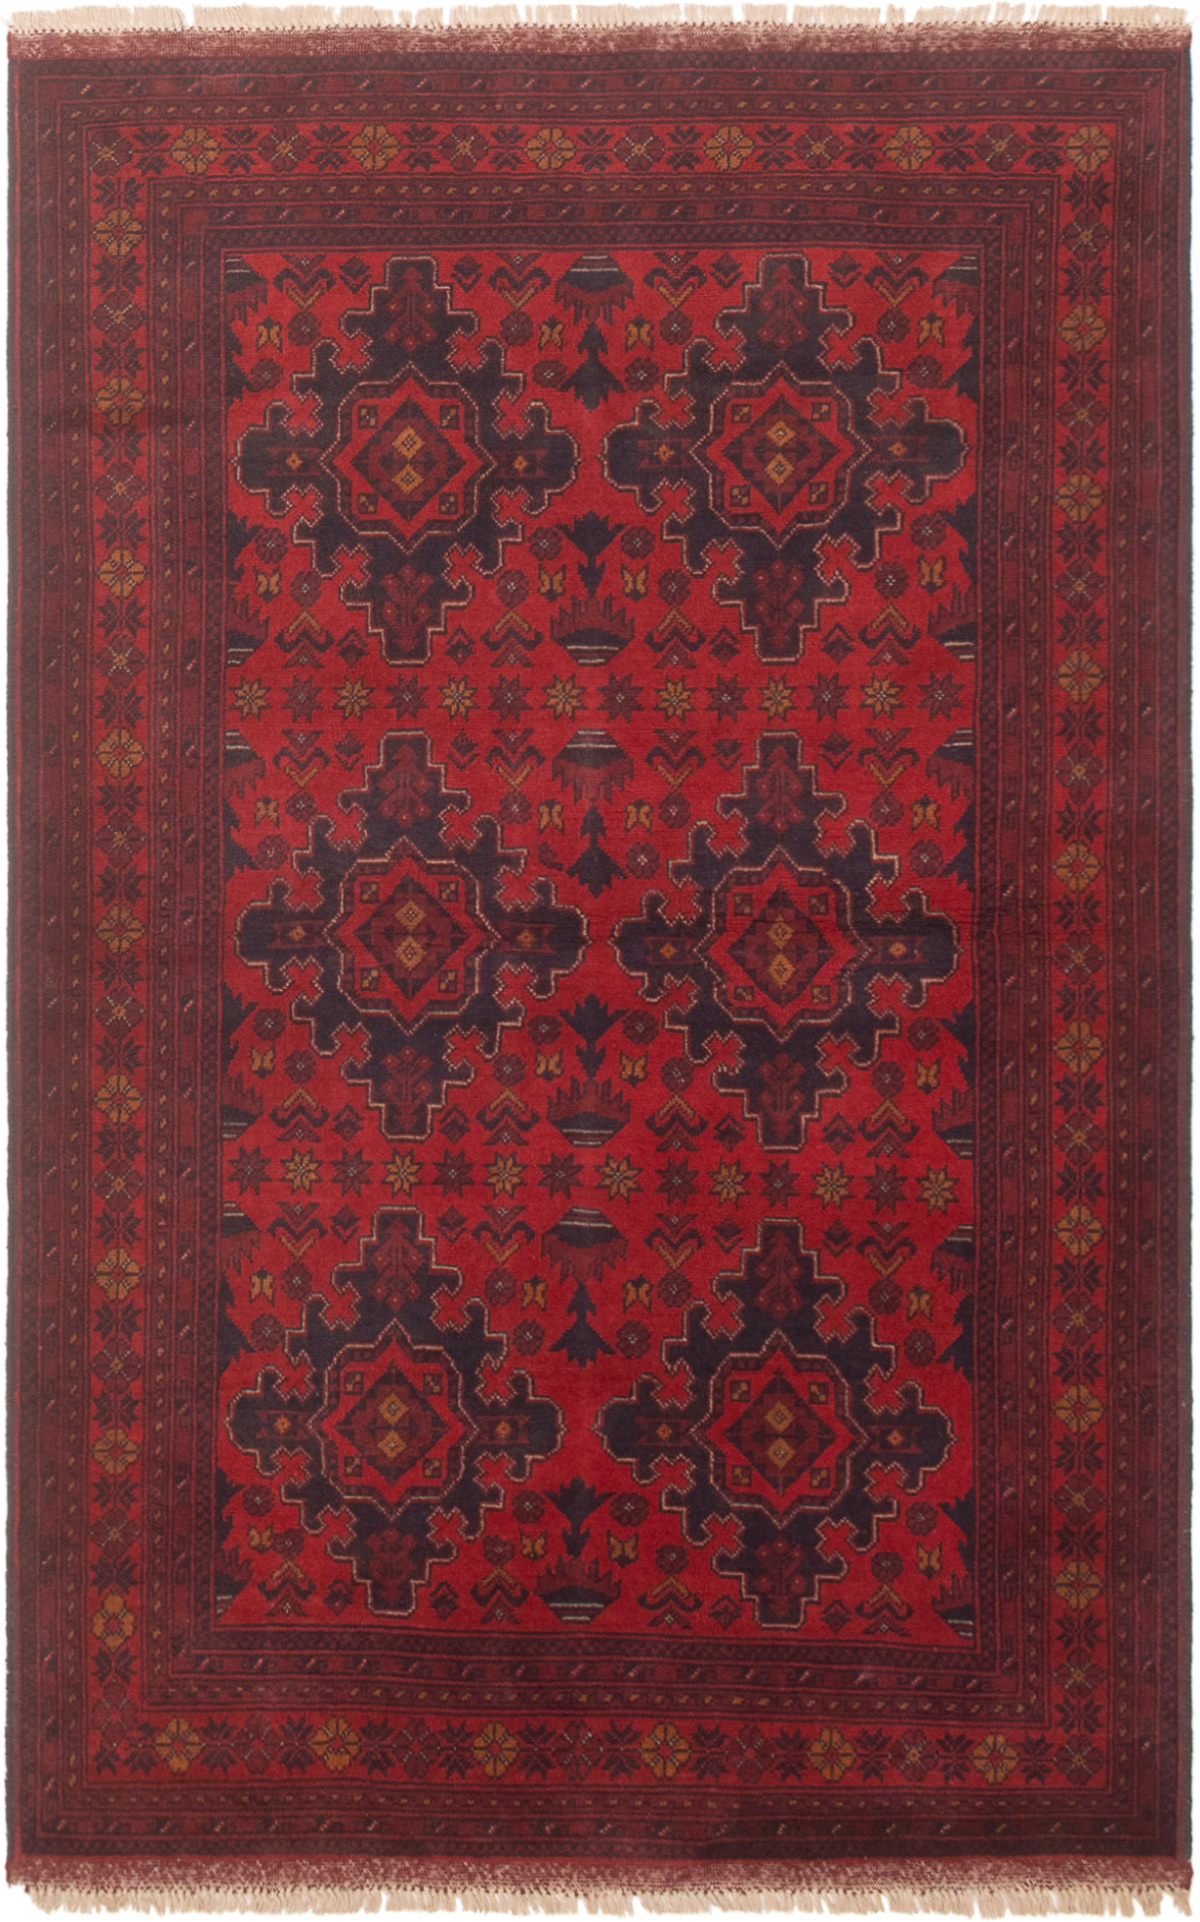 Hand-knotted Finest Khal Mohammadi Red Wool Rug 4'1" x 6'5" (18) Size: 4'1" x 6'5"  